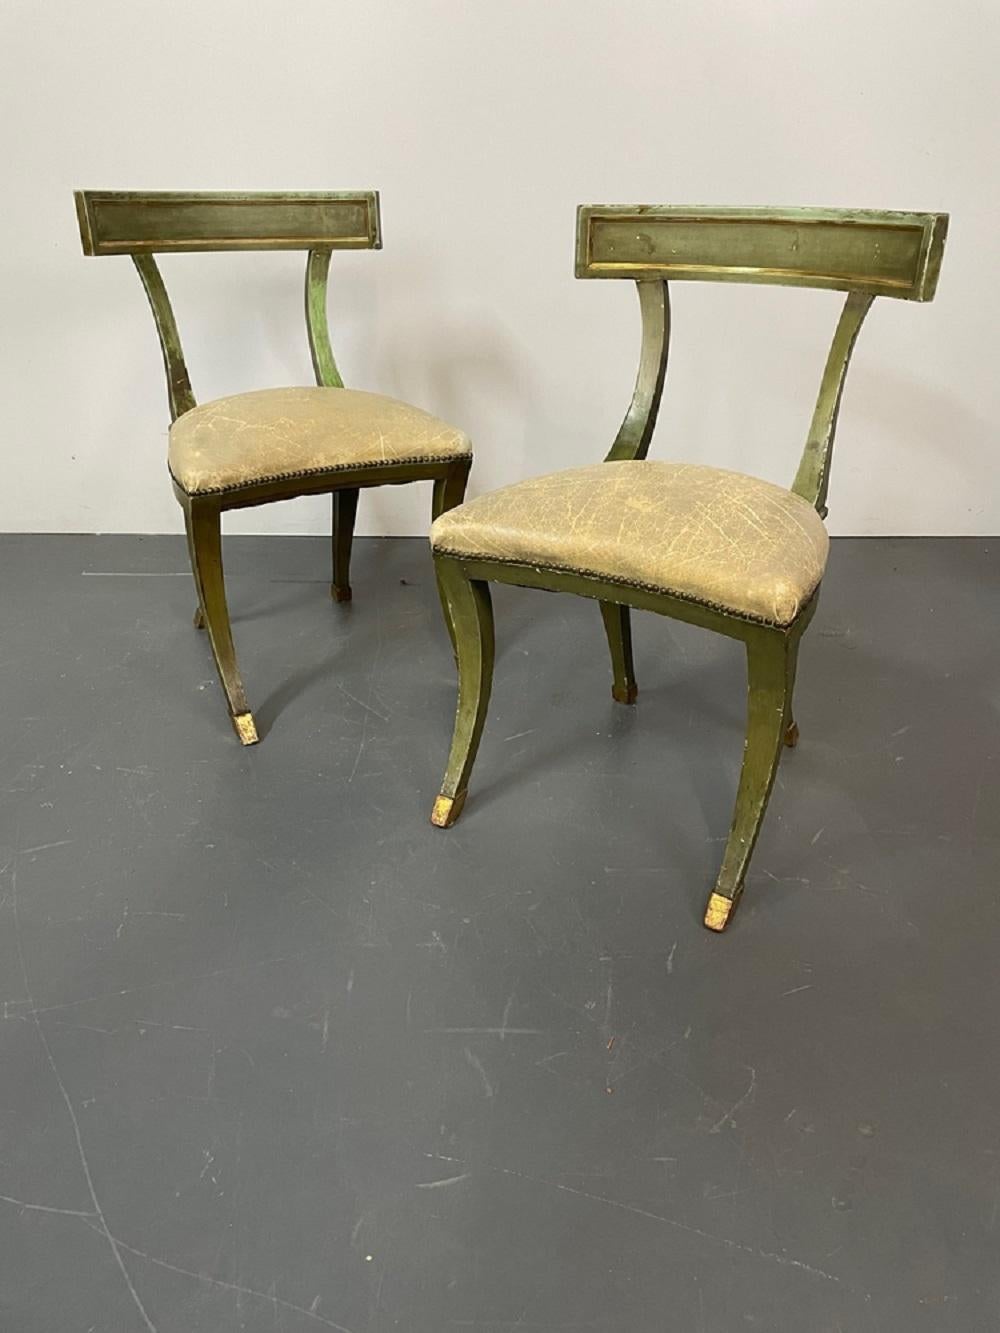 Eight Dining Klismos Maison Jansen Dining Chairs
Each in a paint decorated finish with gilt gold highlights. Klismos form with padded seat rests. This Fine custom quality set of dining chairs are stamped Jansen and come direct from a NYC